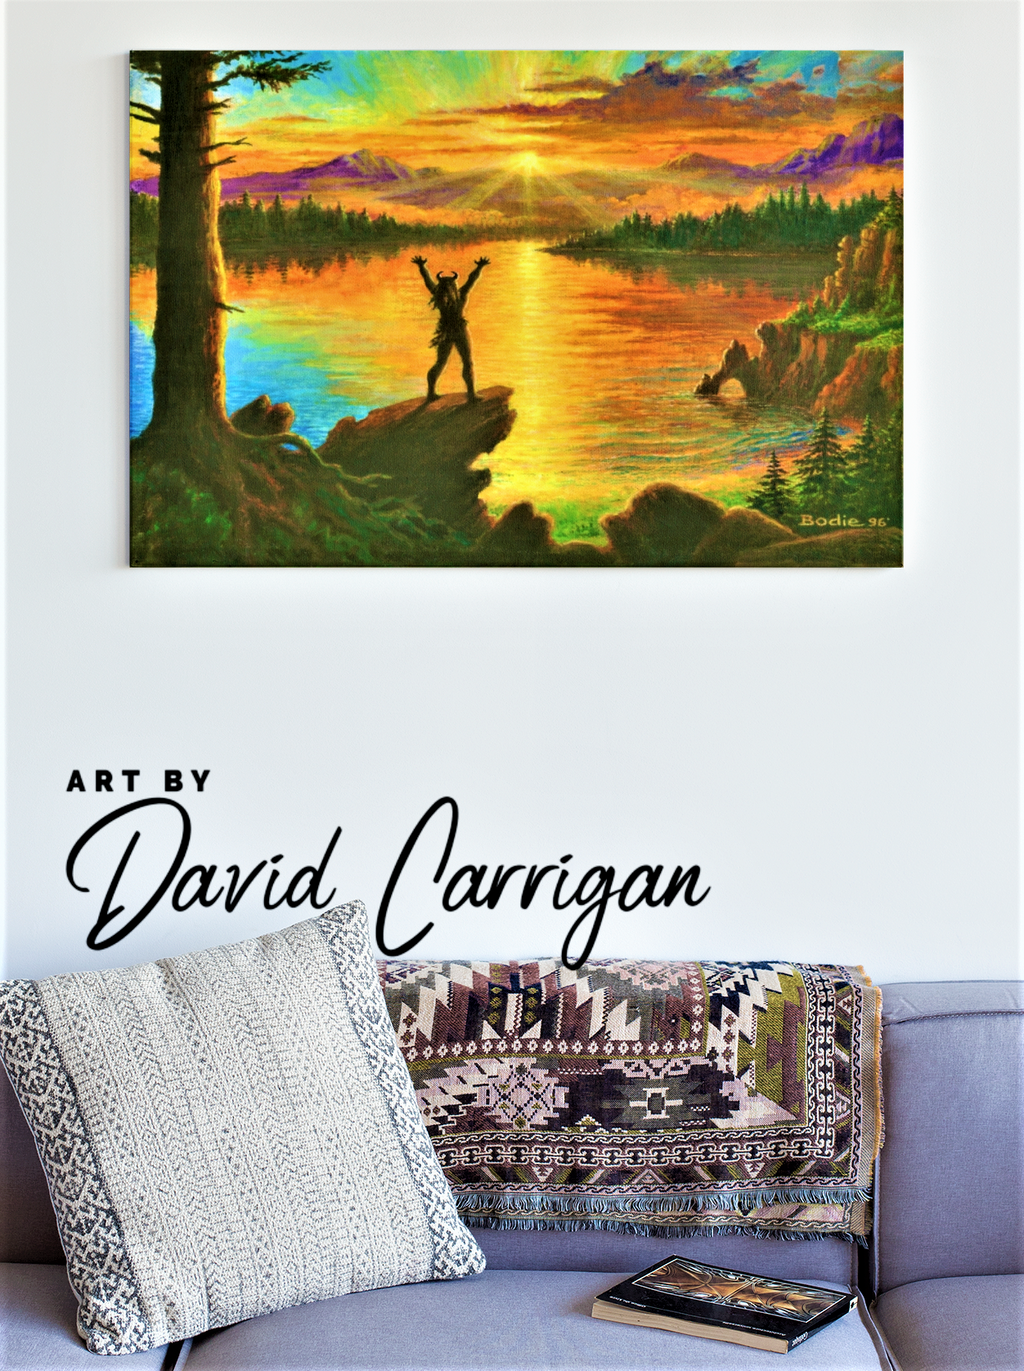 First Light Premium Native American Inspired Canvas Wall Art, by David Carrigan.